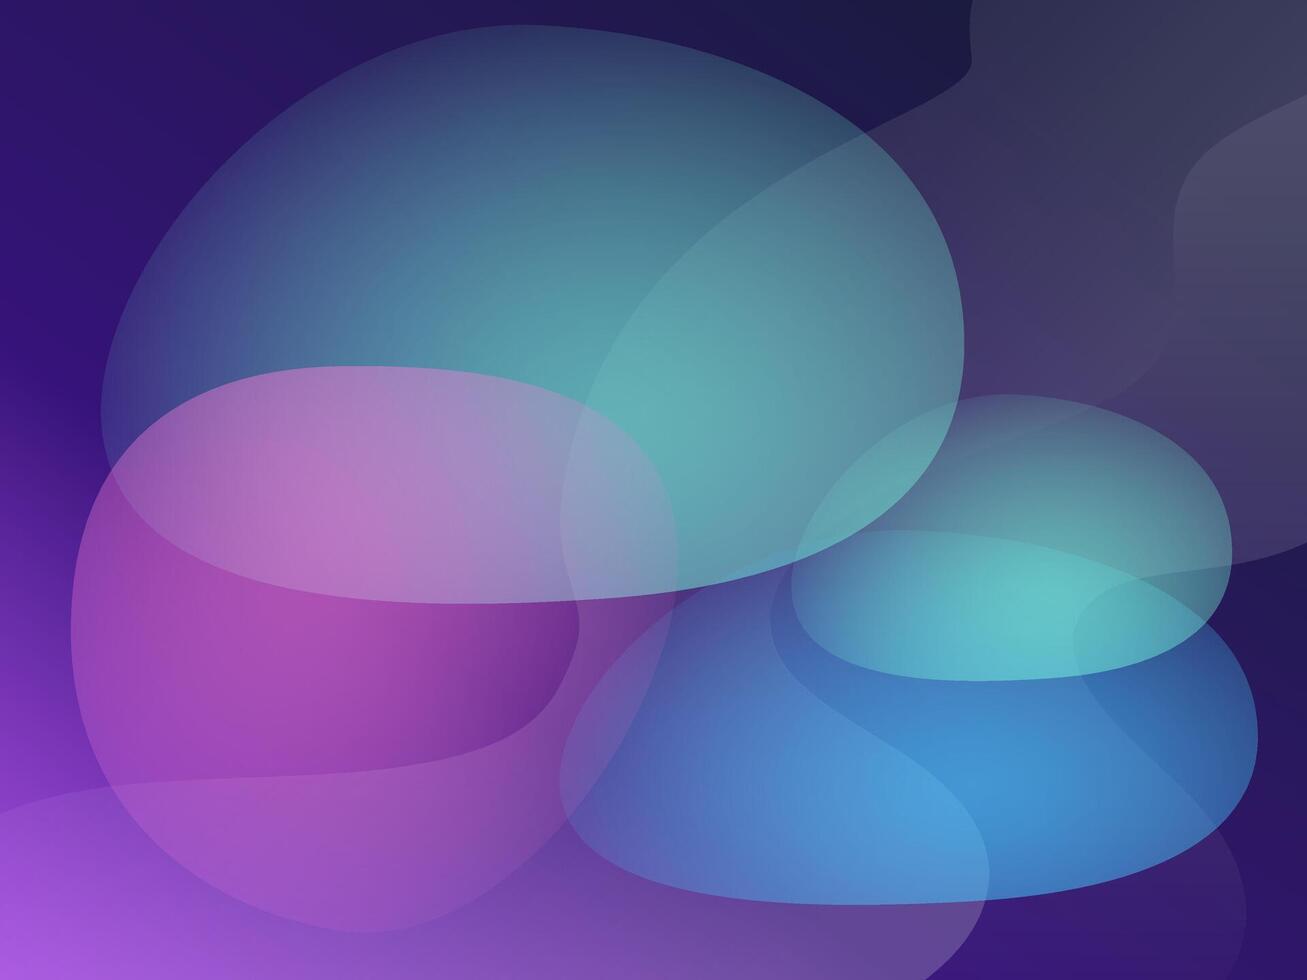 Abstract Background Design with Circles, Lines, and Smooth Curves vector